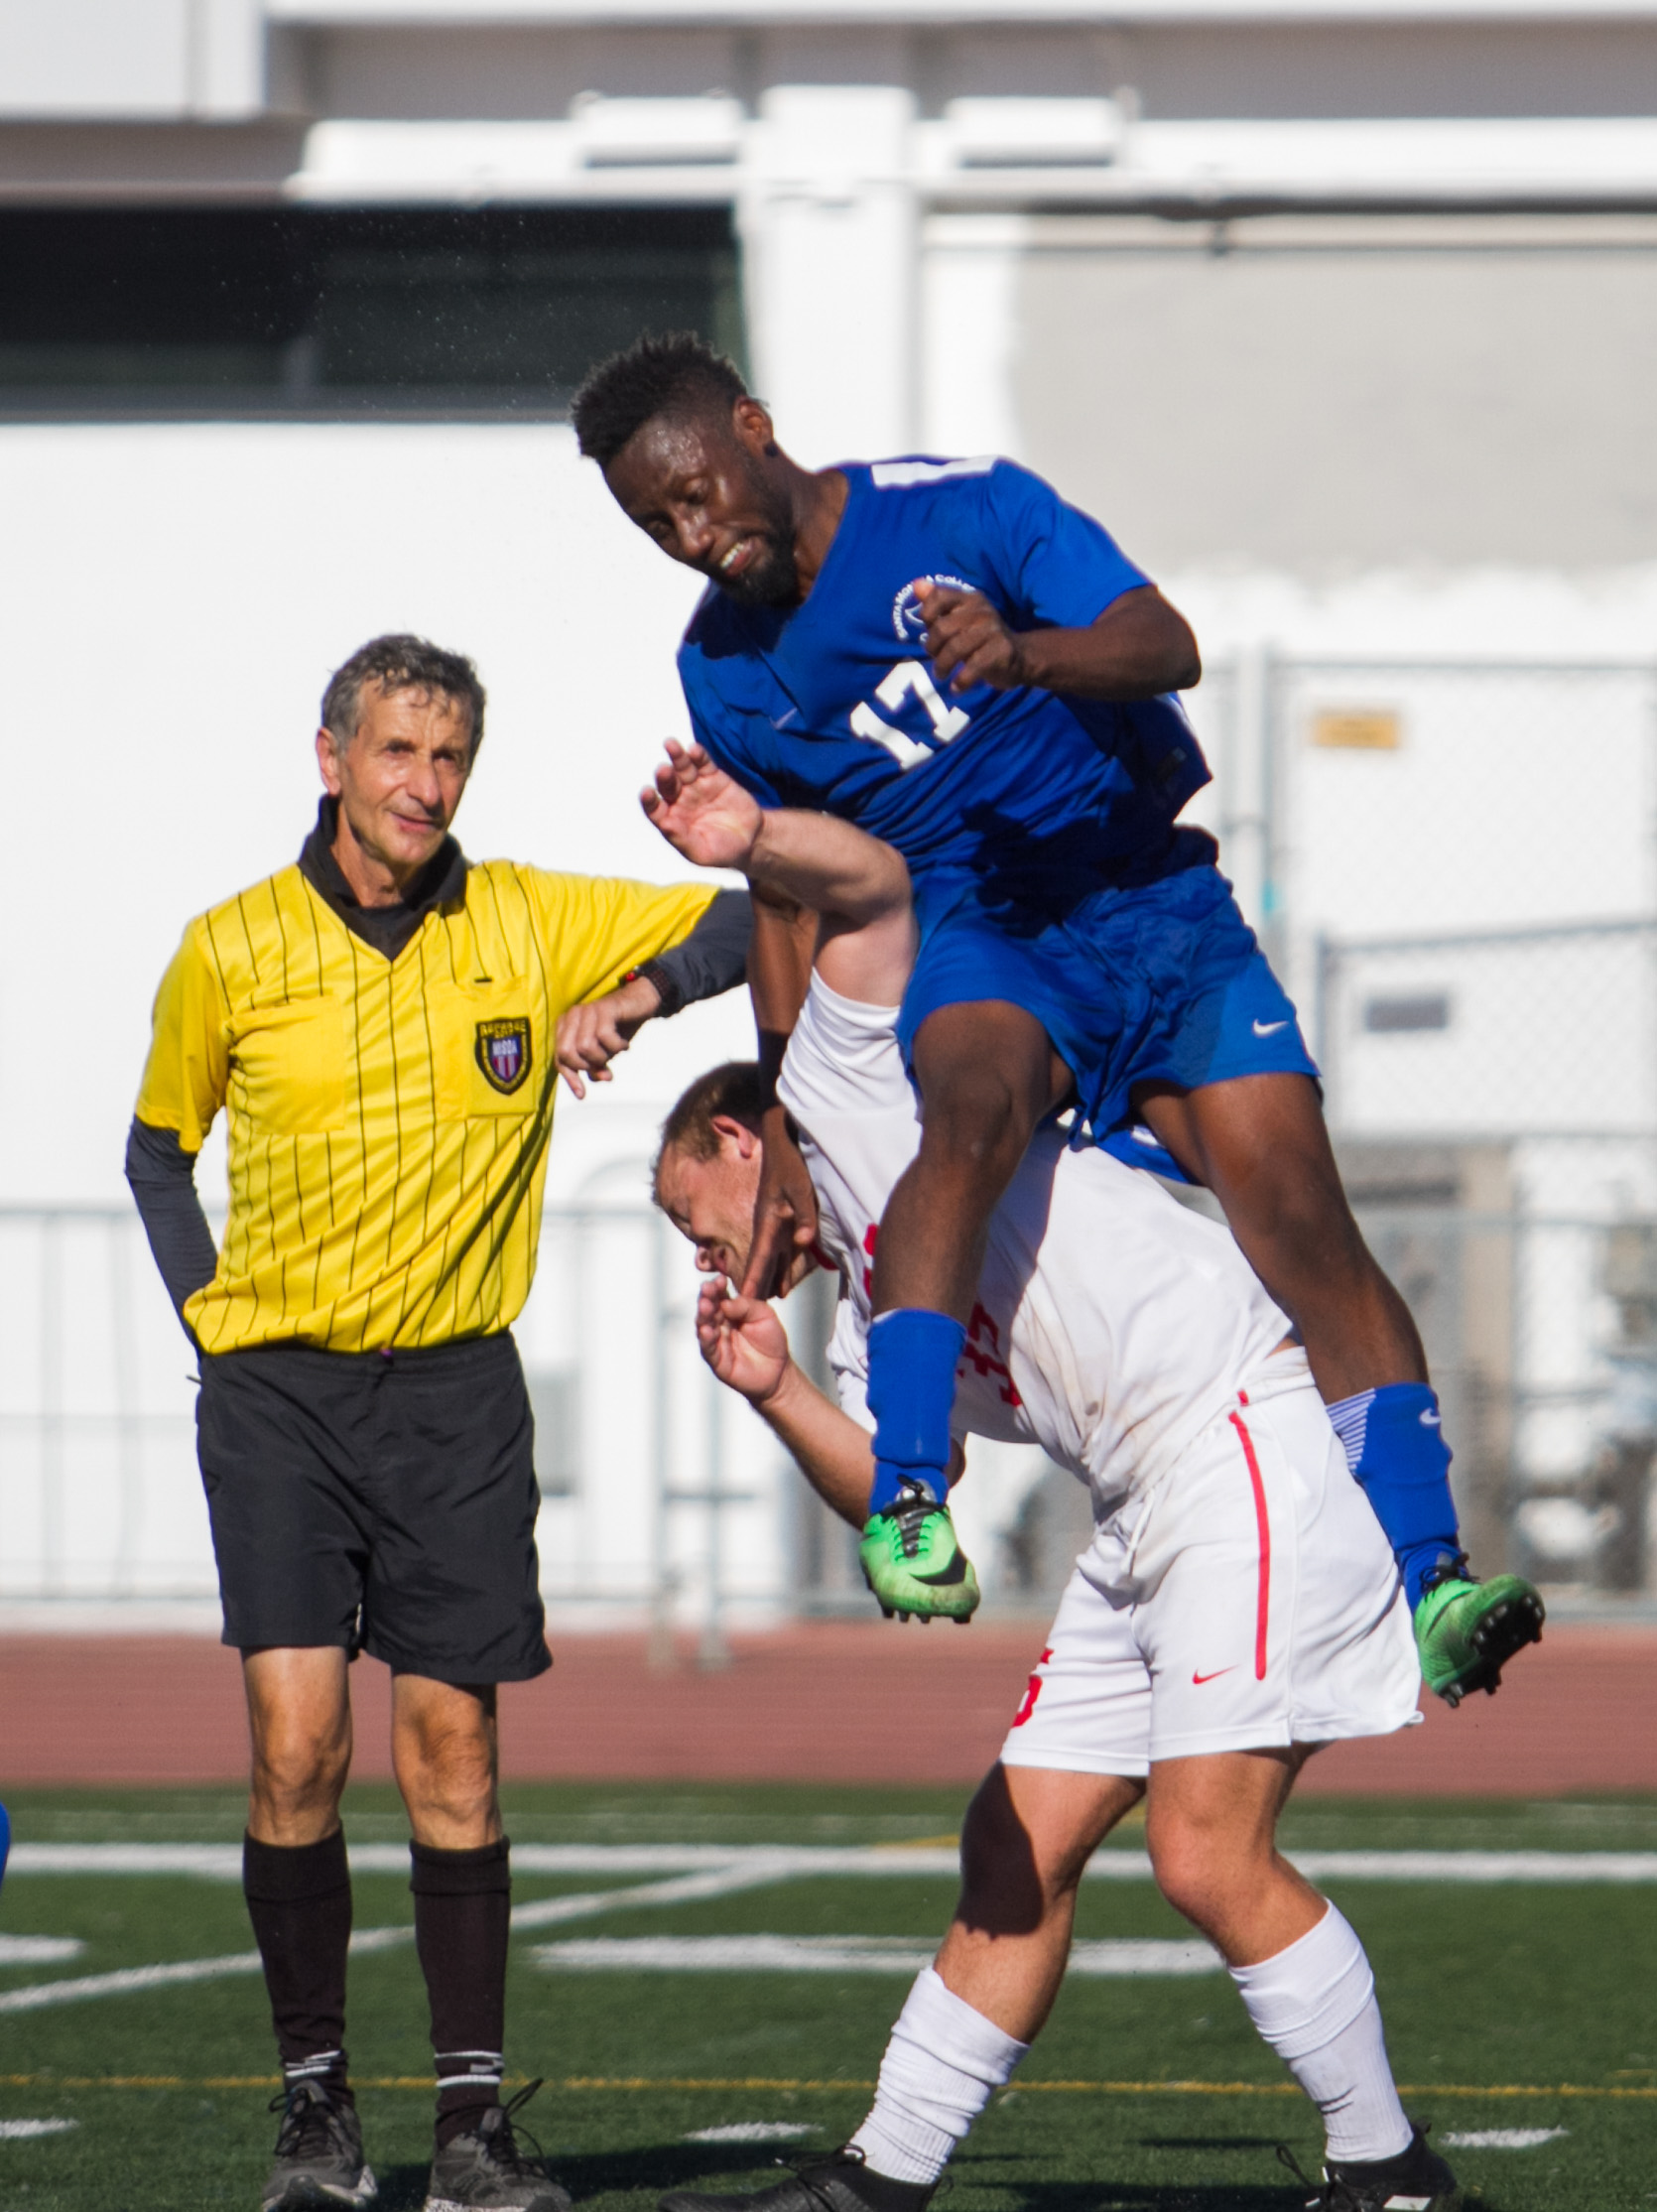  Santa Monica College Corsair Cyrille Njomo (17)(R) fights for possession of the ball  against Santa Barbara City College Vaquero Nathan Nundley (35)(L) on Tuesday, October 24, 2017, on the Corsair Field at Santa Monica College in Santa Monica, Calif